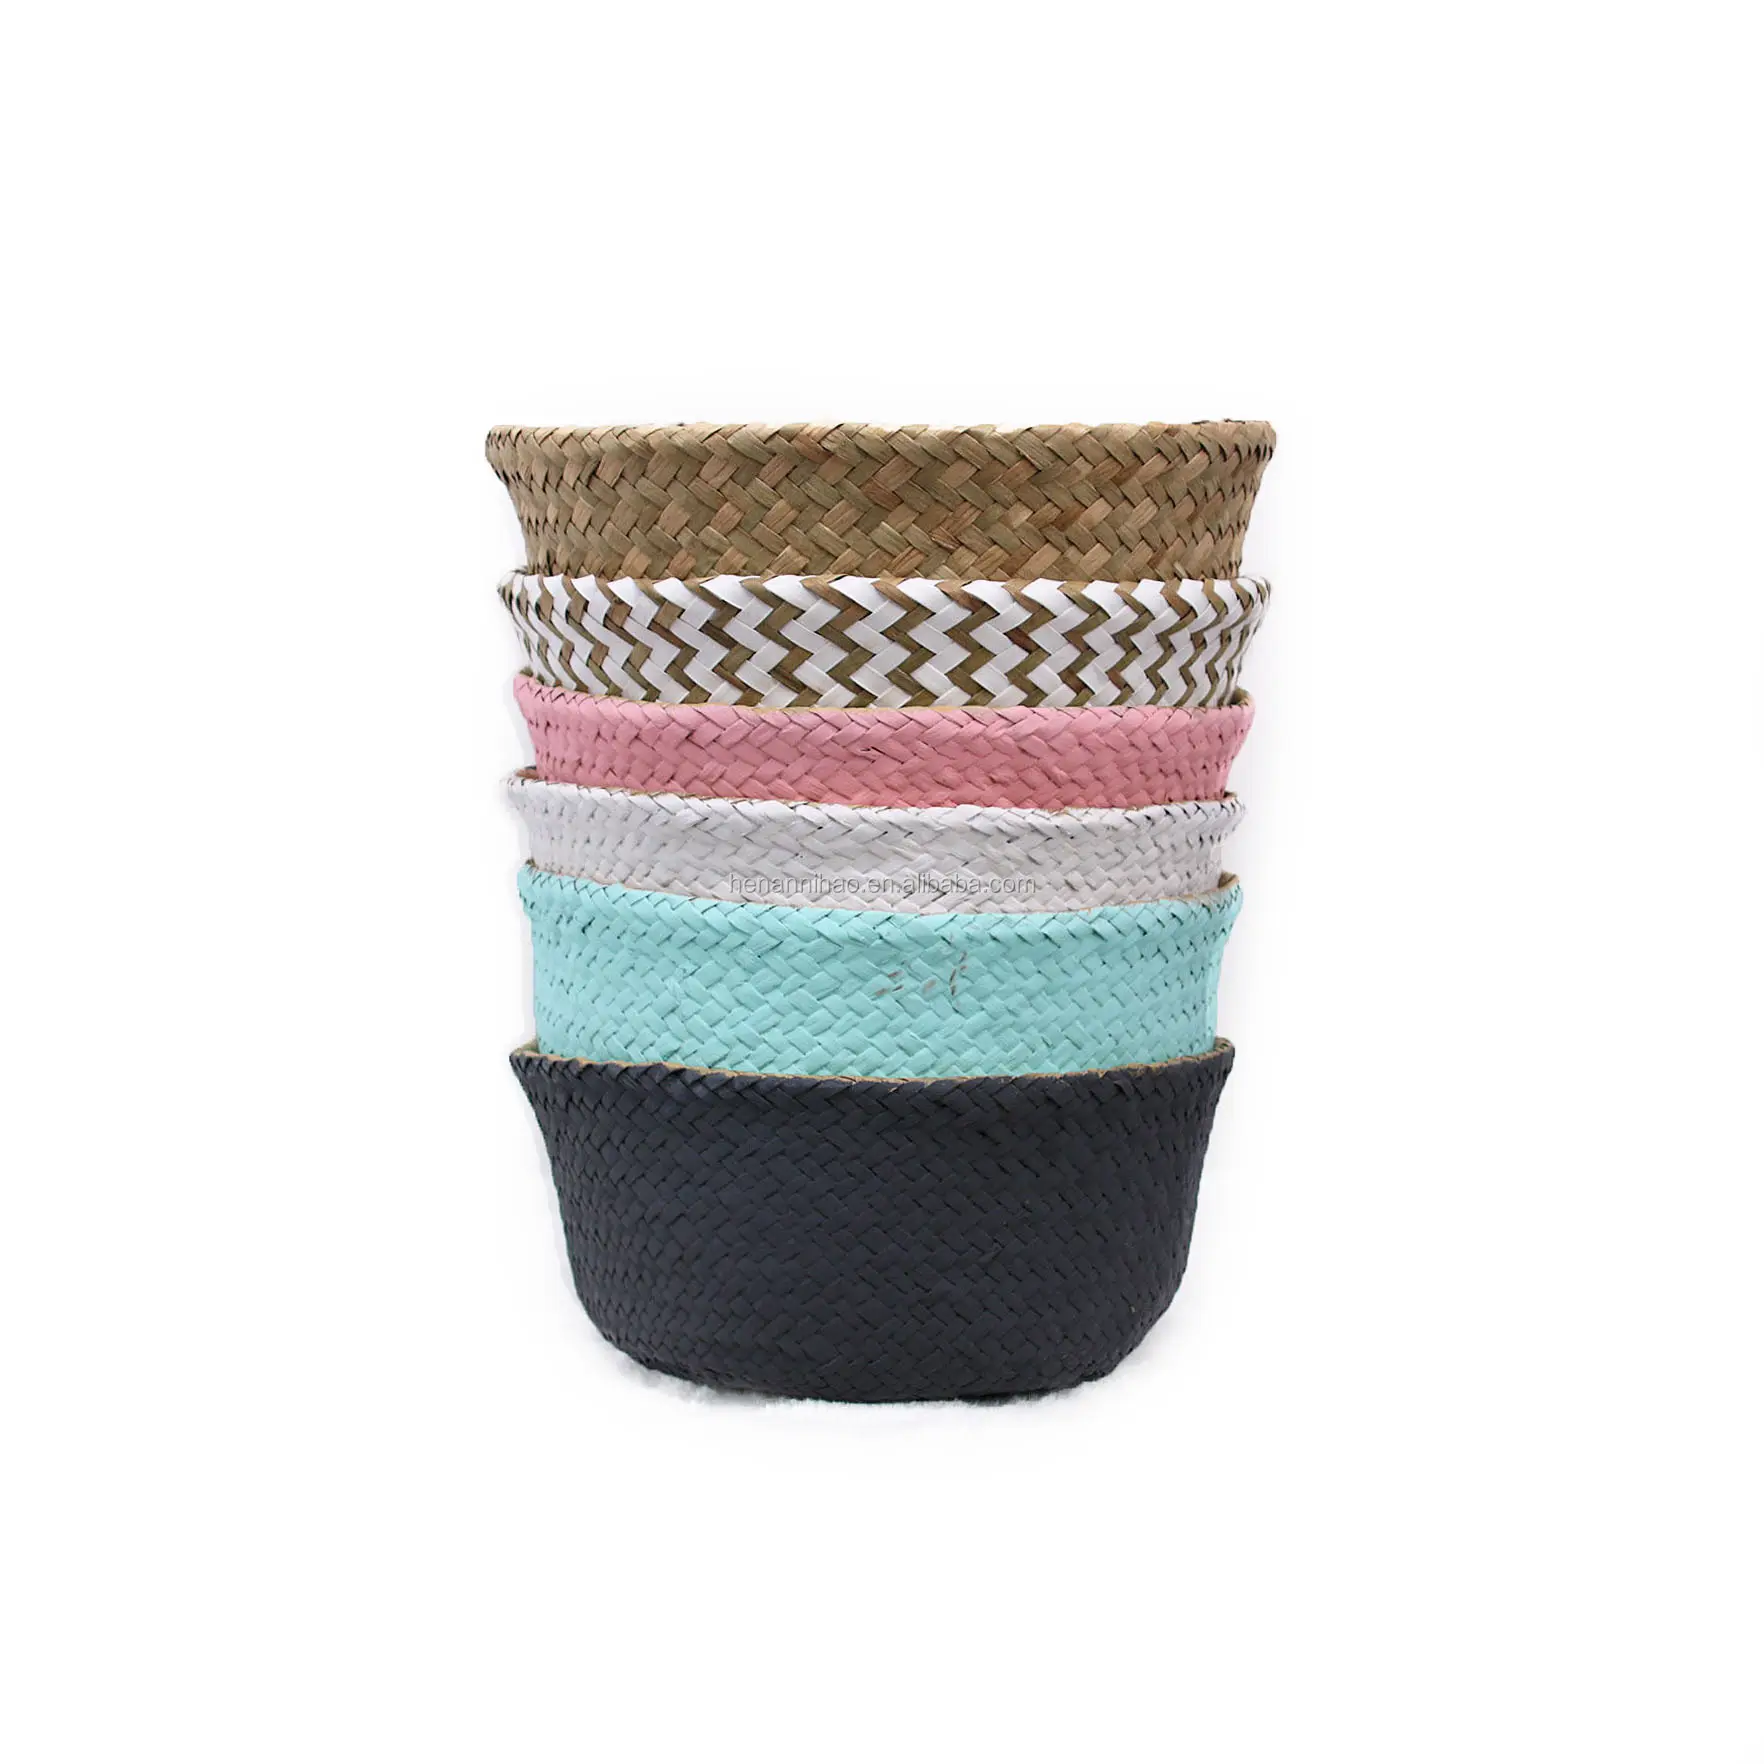 Hot Sale changeable Woven Seagrass Belly Basket for Storage Plant Pot Basket and Laundry, Picnic and Grocery Basket